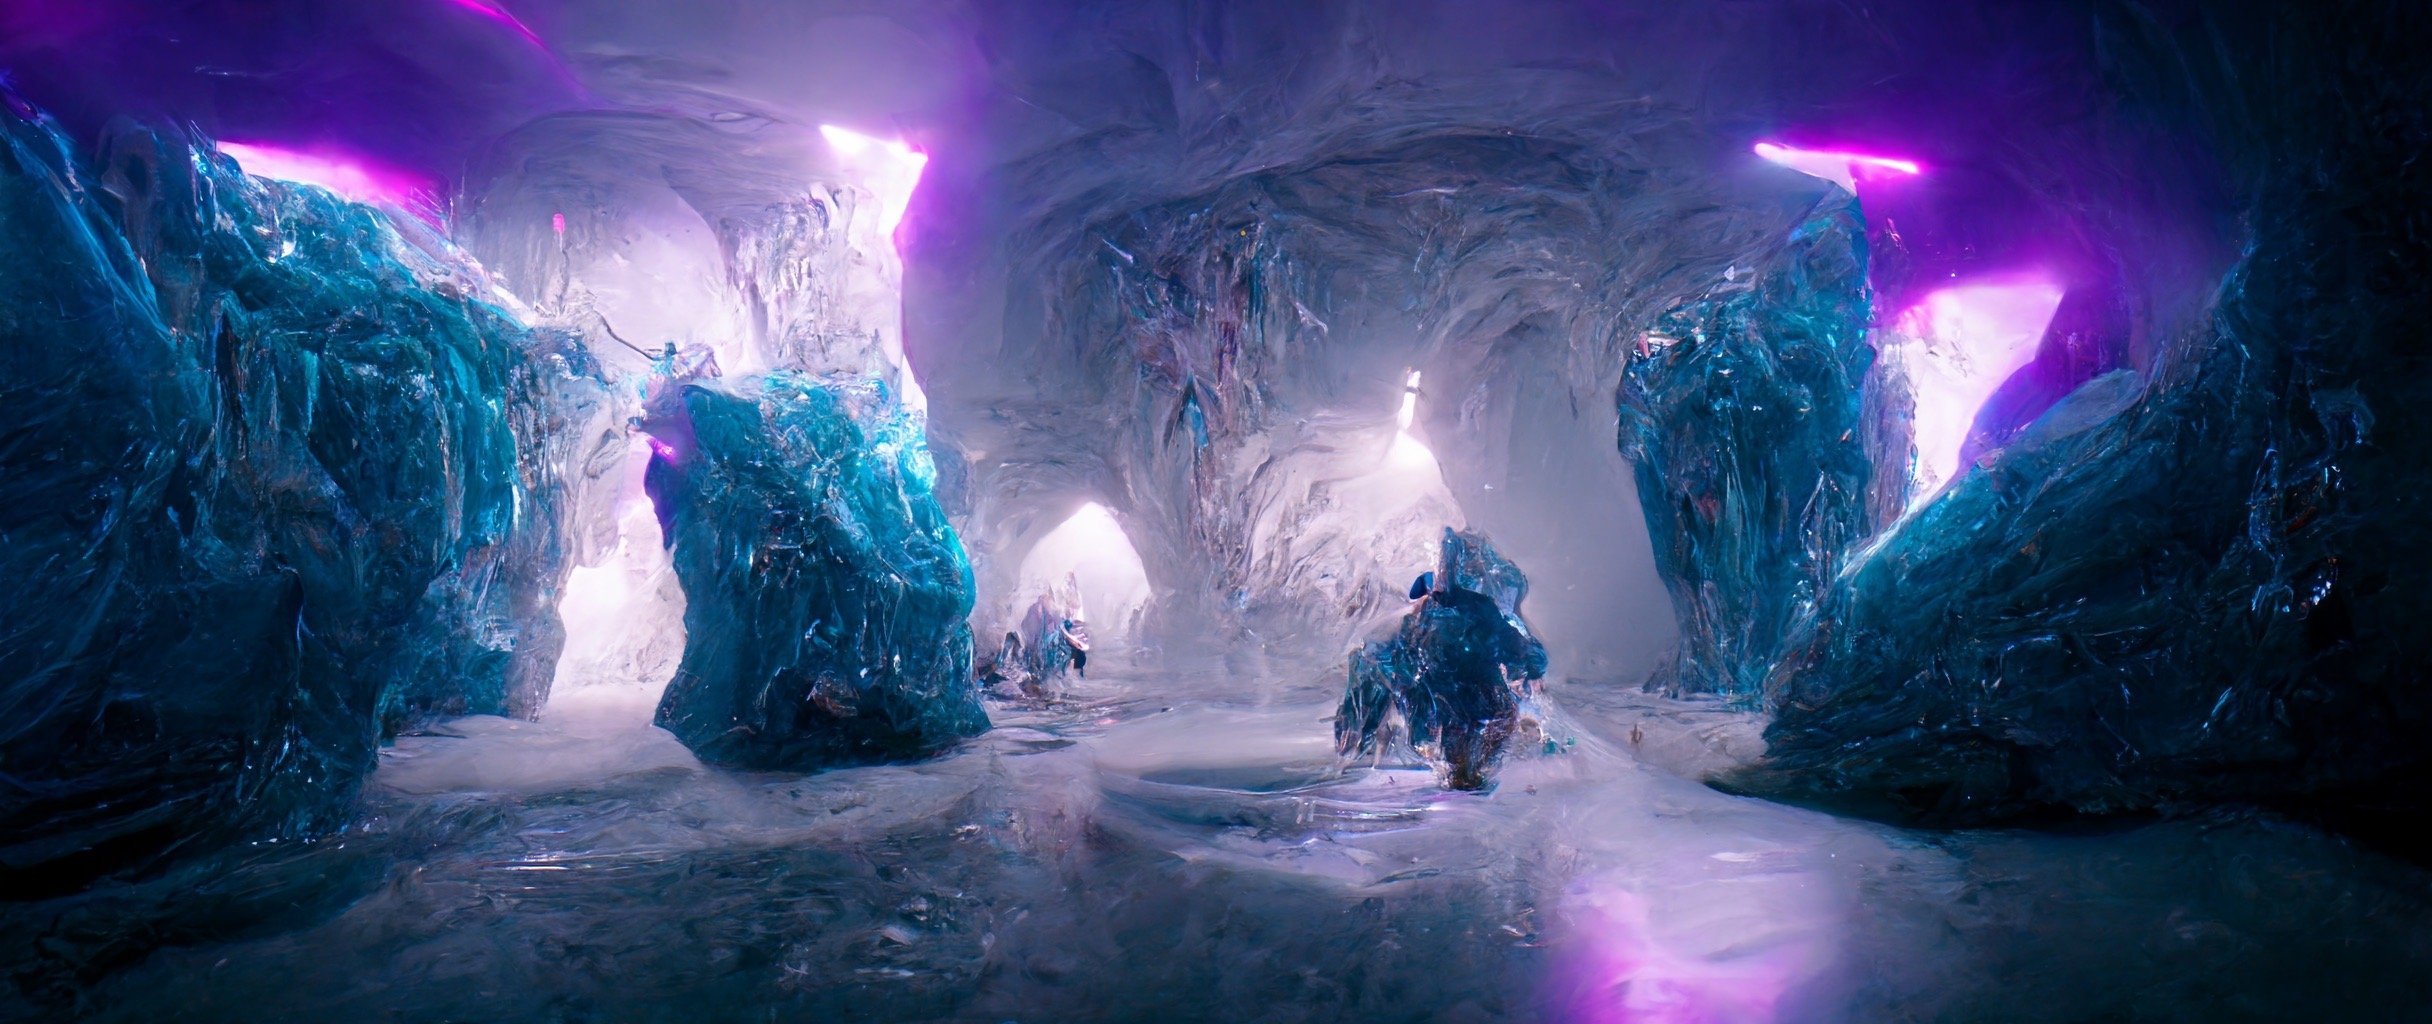 7b466cc6-7701-4ce4-803d-4ad6e0d5abe6_S3RAPH_epic_video_game_style_boss_fight_in_mystical_detailed_ice_cave._motion_blur_attach._8k_cinematic_com.JPG